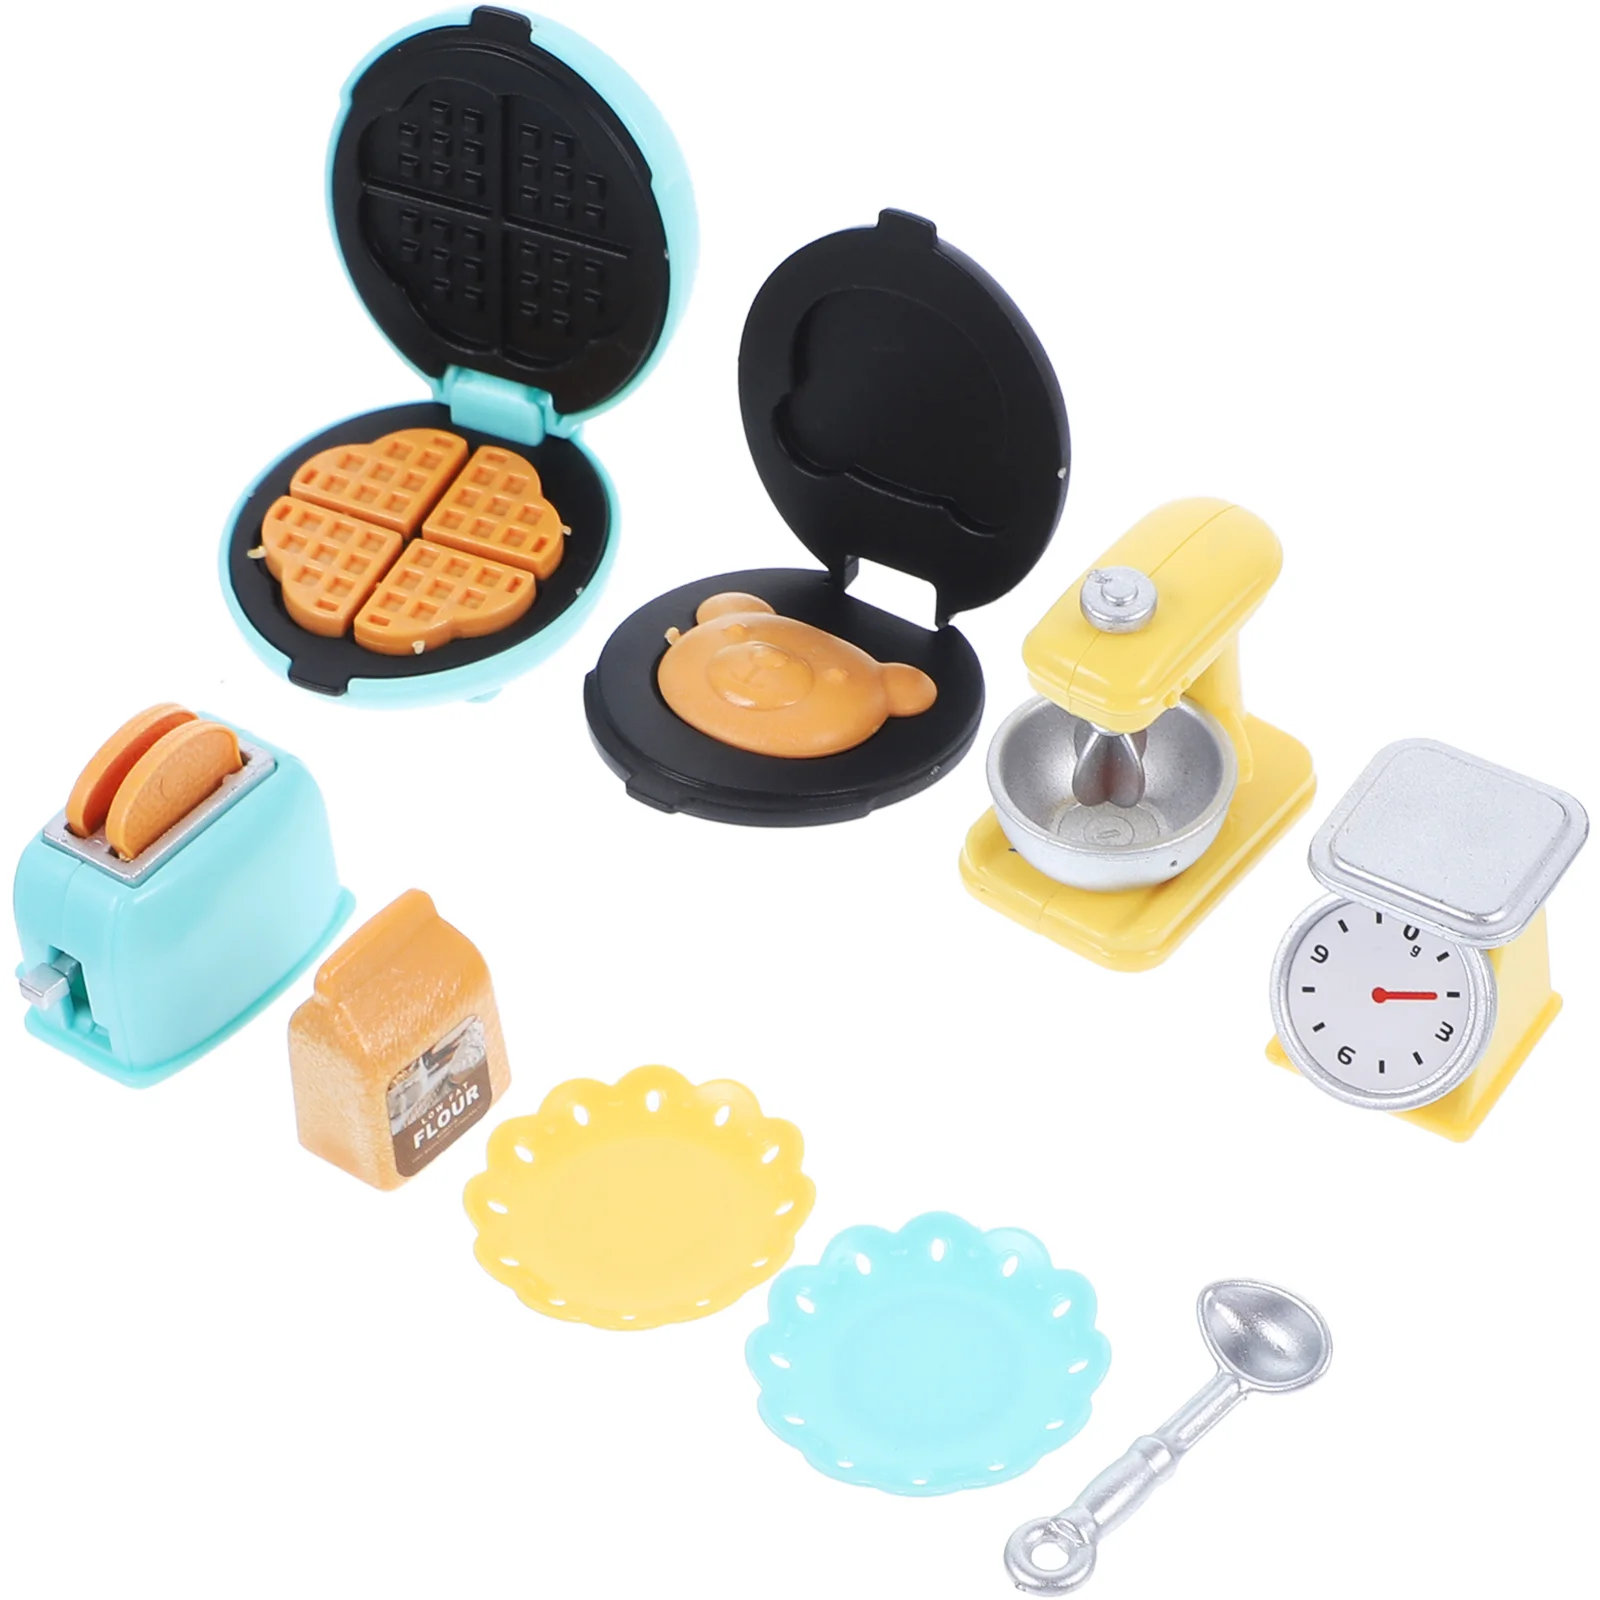 

Miniature Waffle Maker Dollhouse Cooker Miniature Kitchenware Toy Toys Kids Micro Scene Decor DIY Electronic Scale Layout